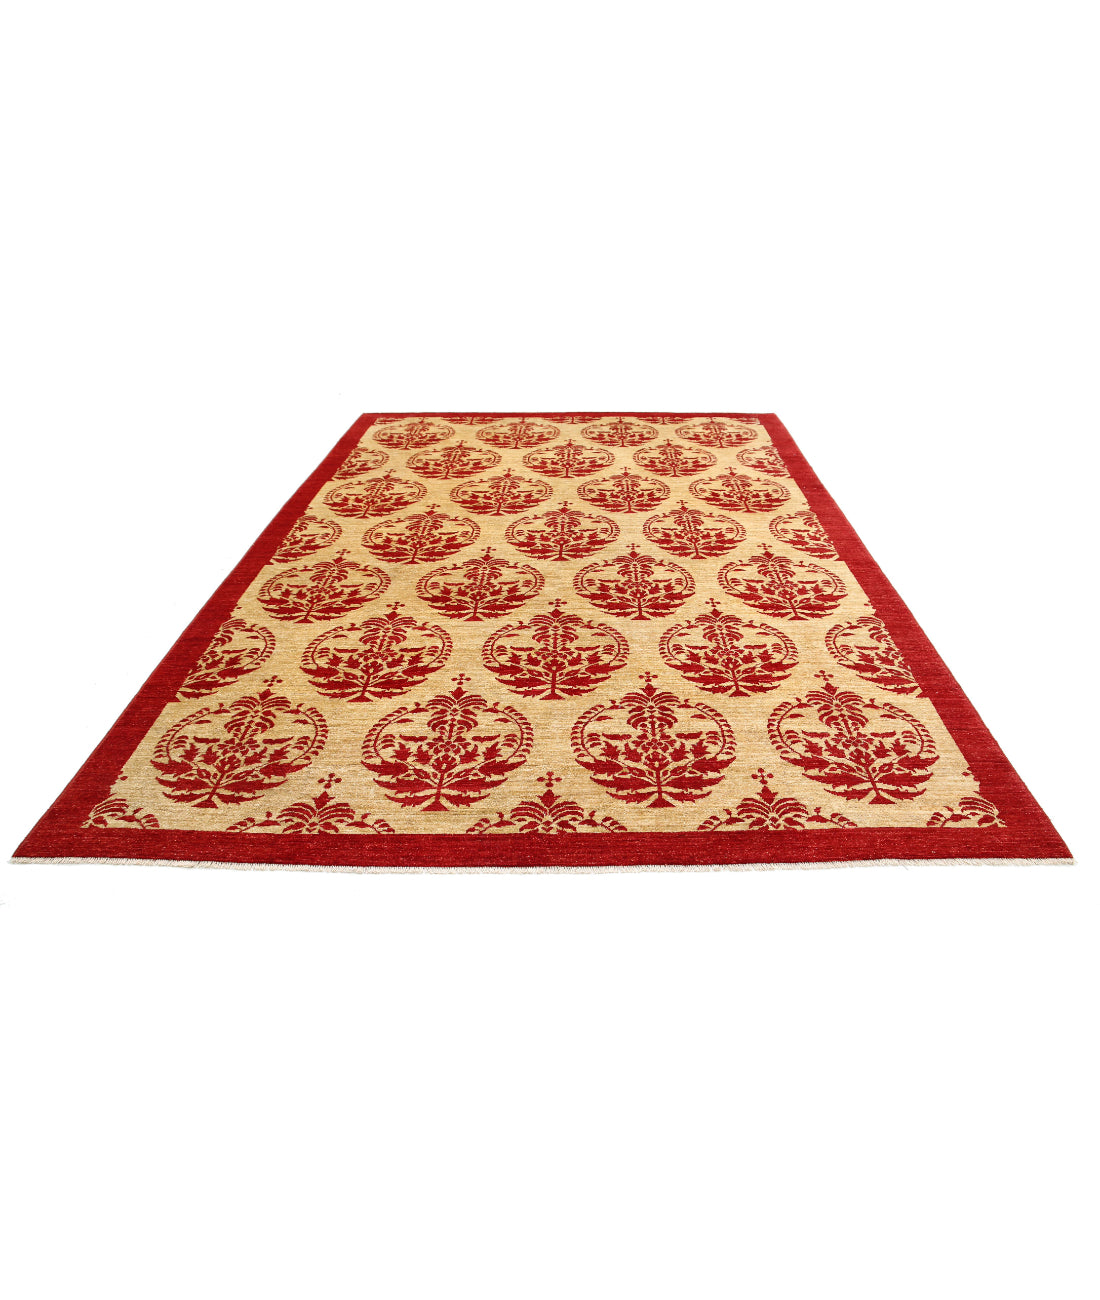 Hand Knotted Modcar Wool Rug - 8'4'' x 11'5'' 8'4'' x 11'5'' (250 X 343) / Beige / Red